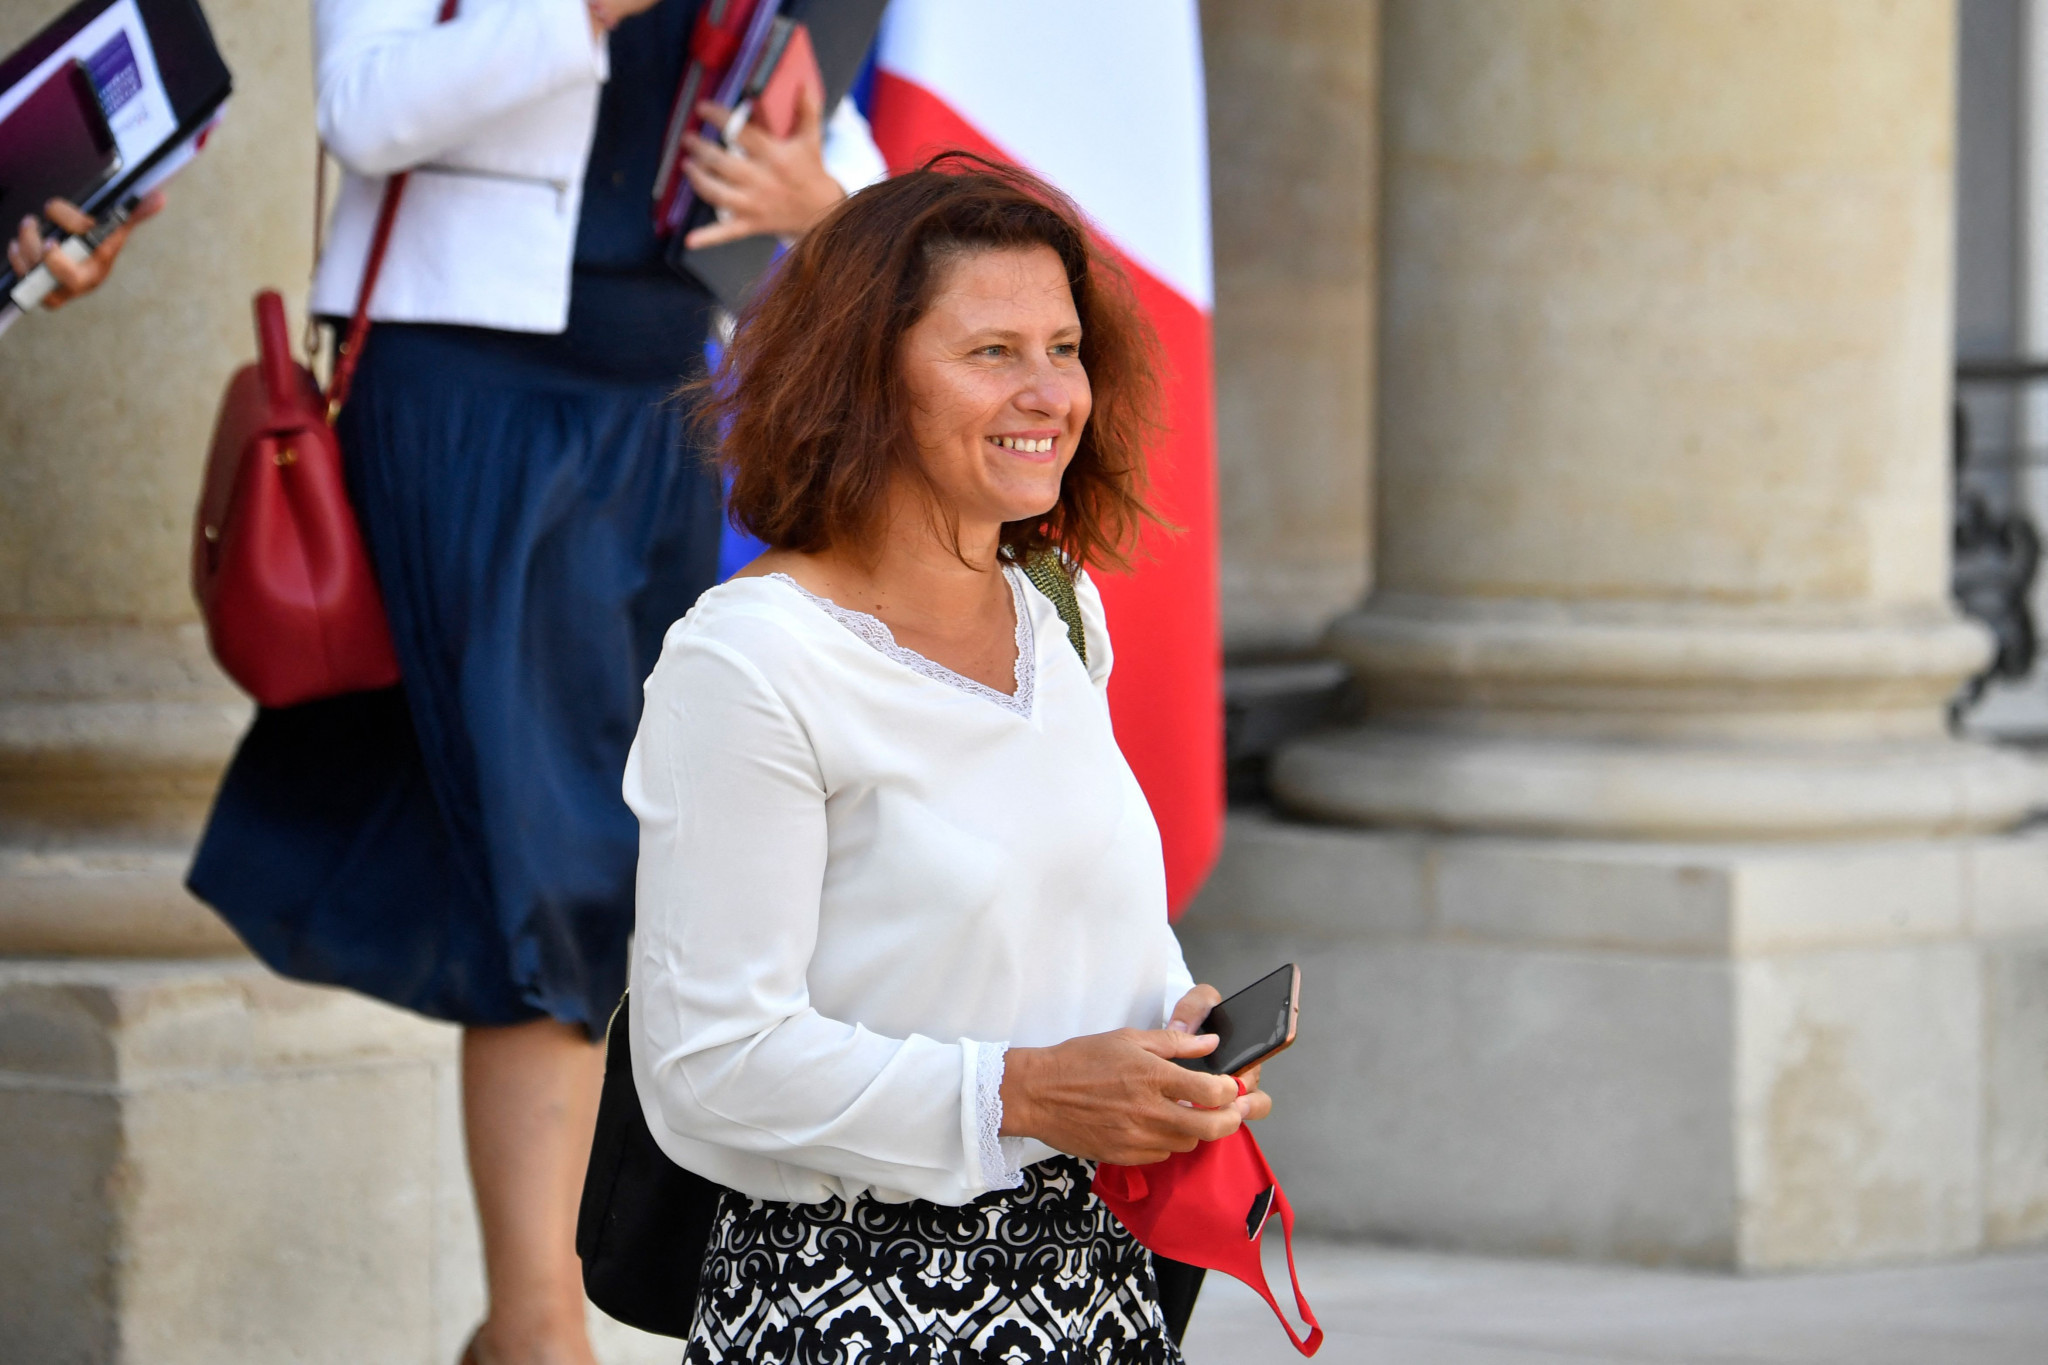 French Sports Minister Maracineanu says she will join WADA Executive Committee in 2022